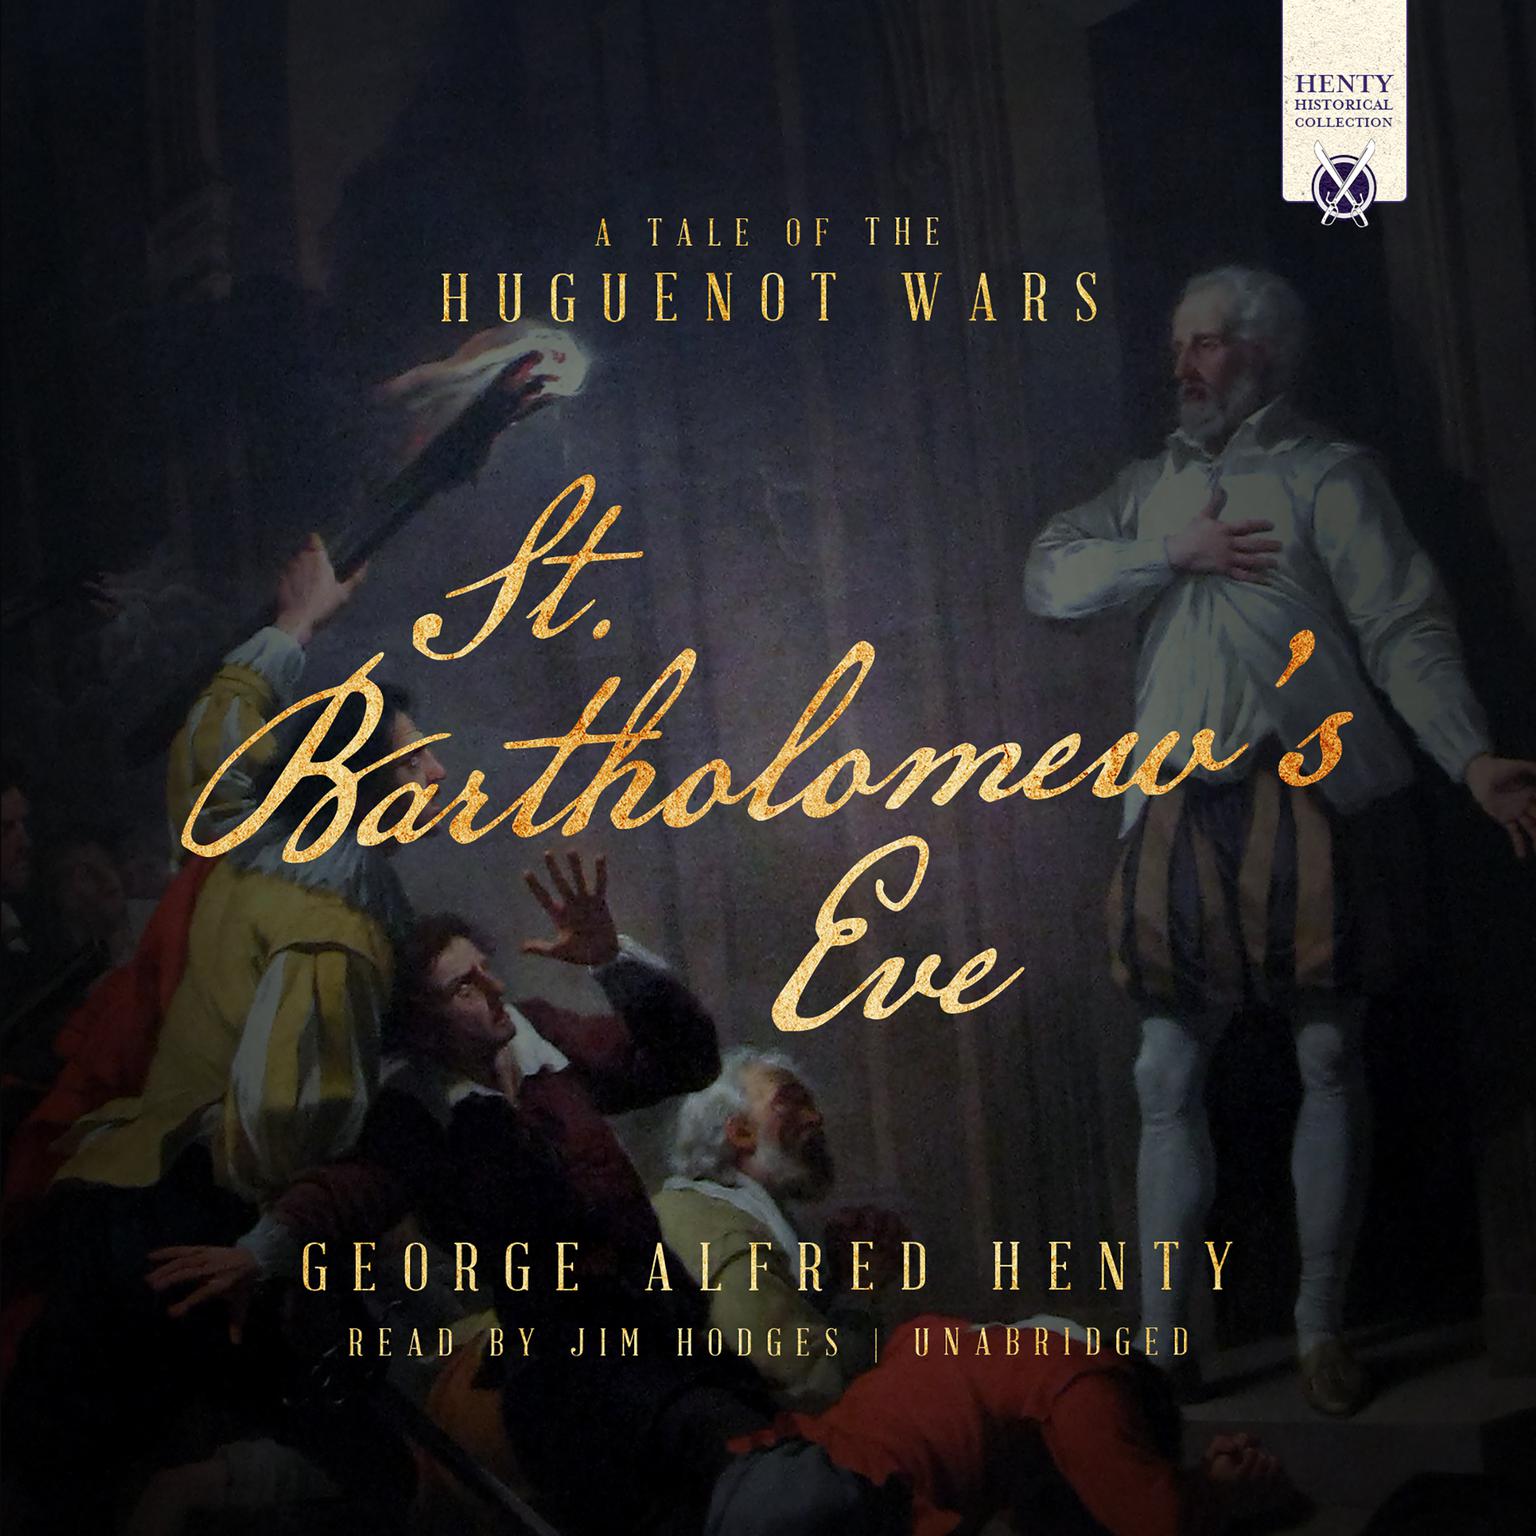 St. Bartholomew’s Eve: A Tale of the Huguenot Wars Audiobook, by George Alfred Henty